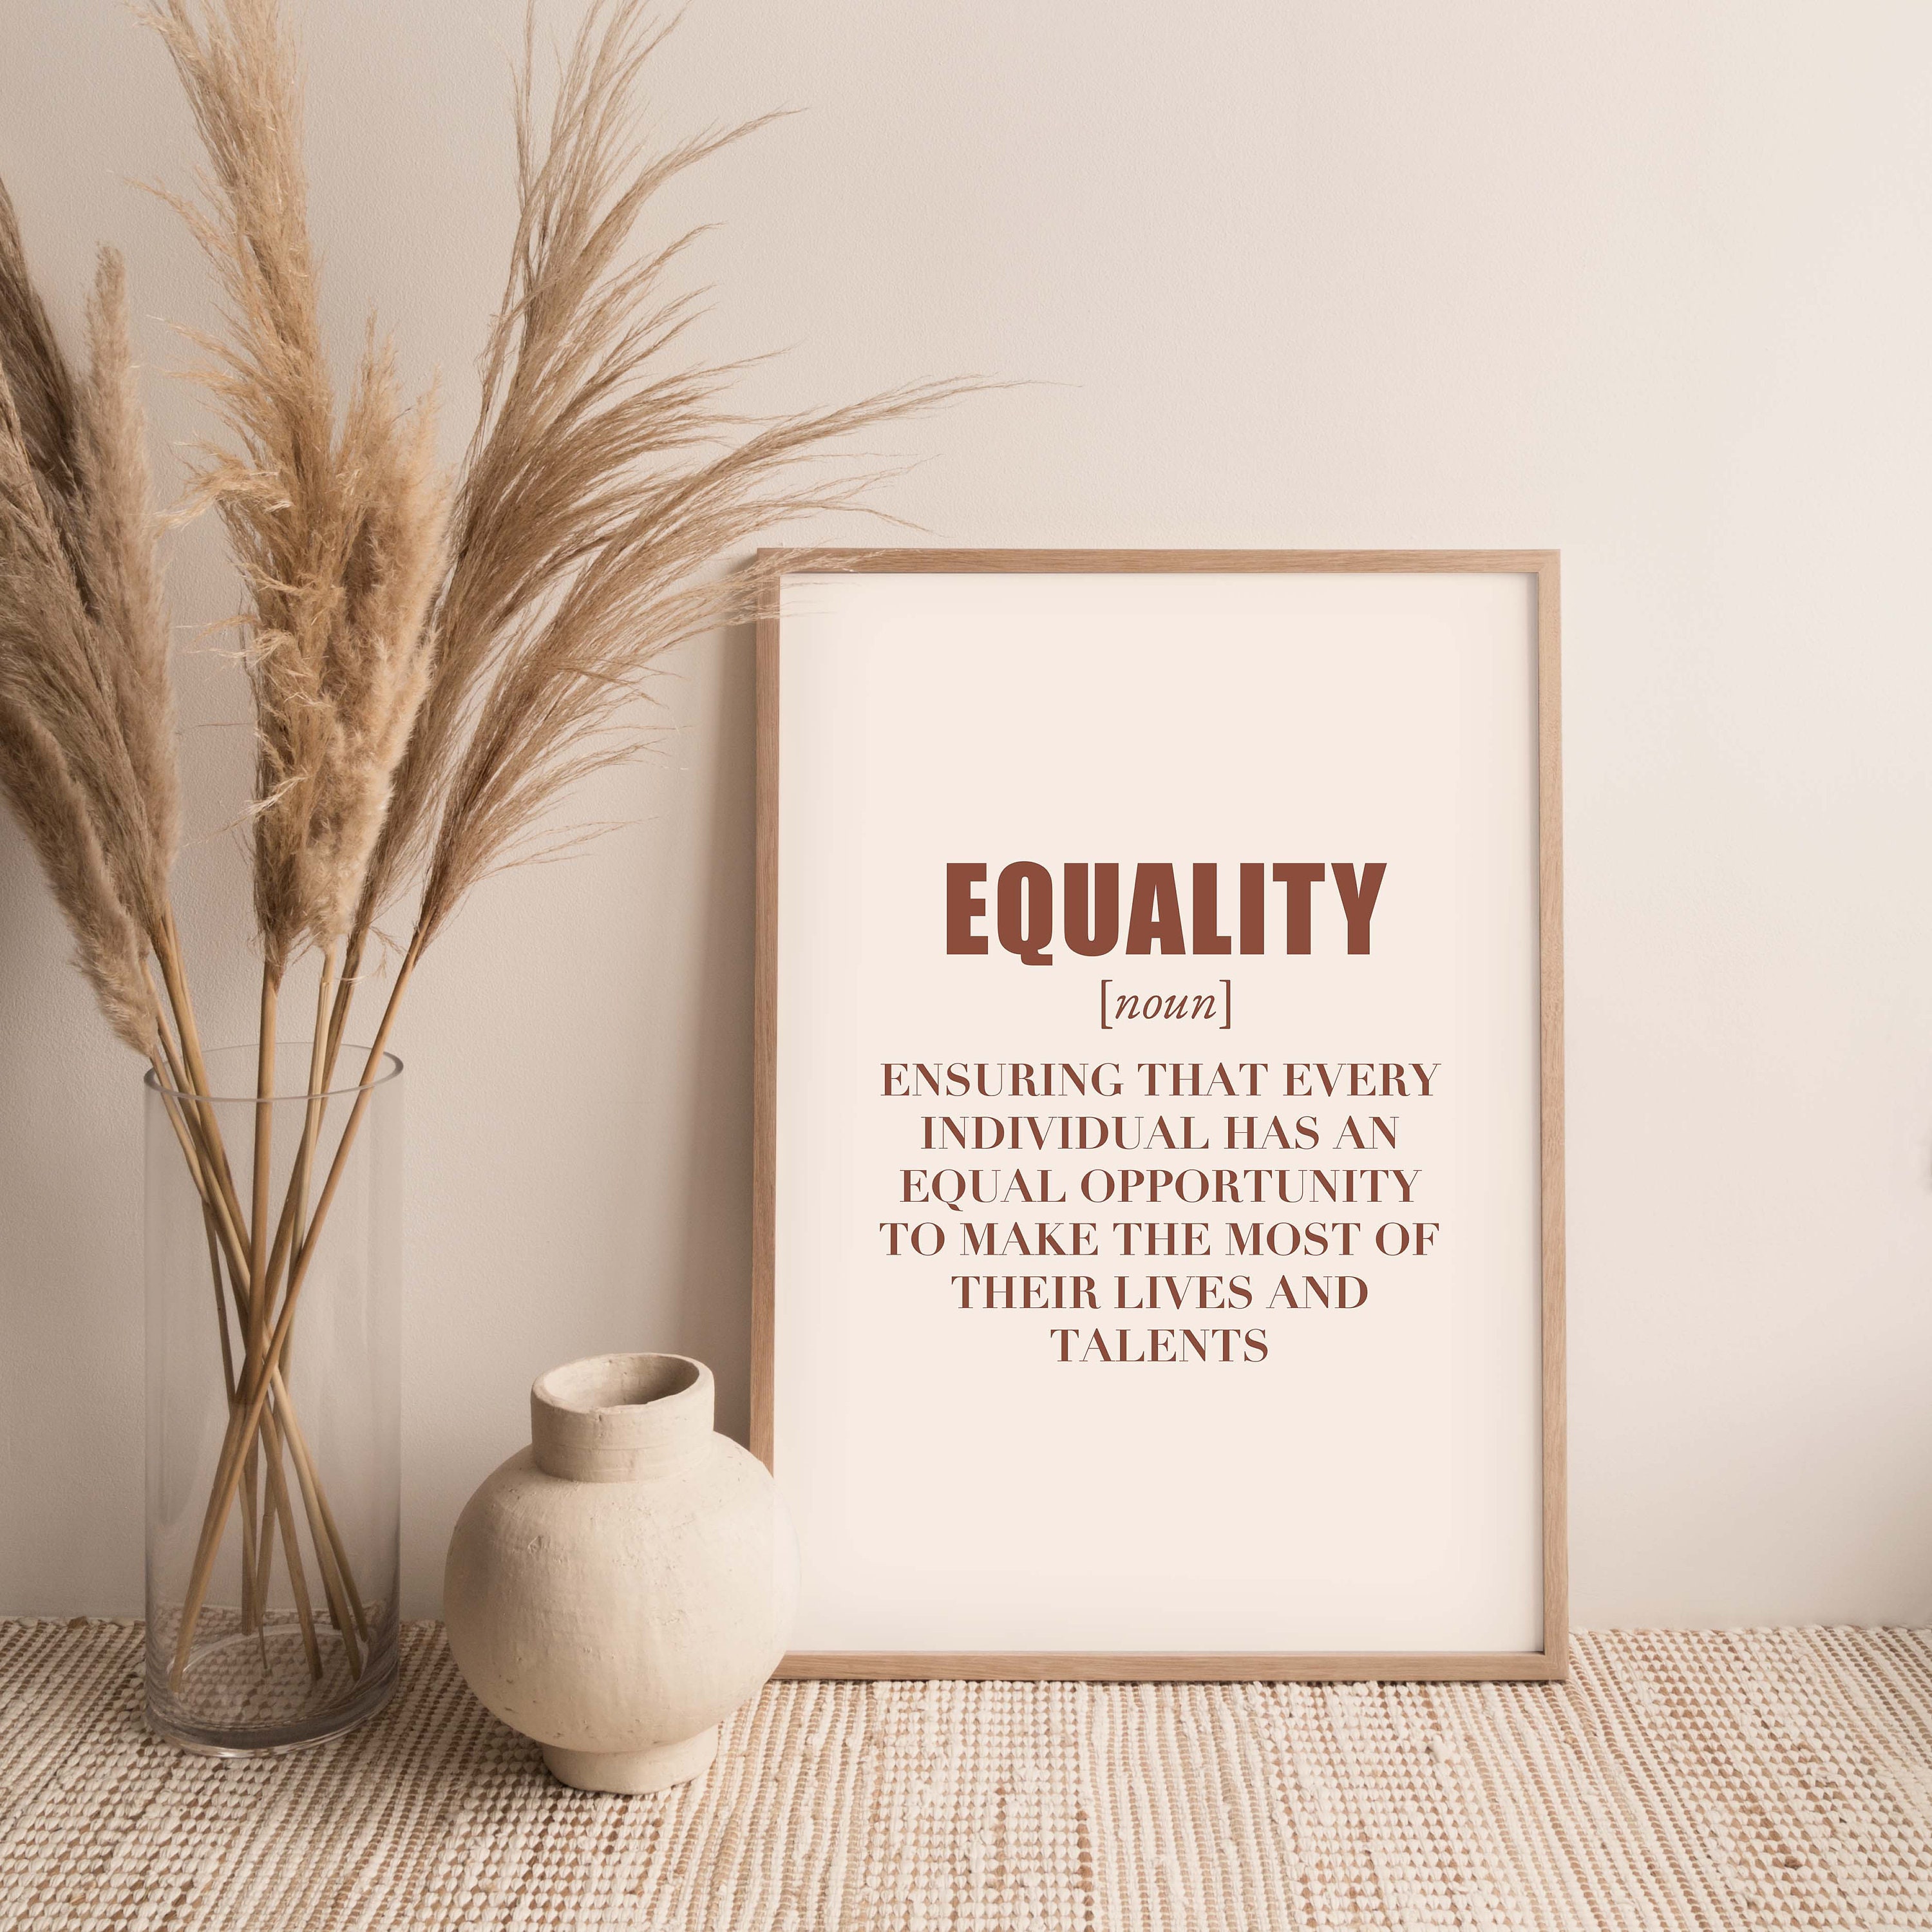 Equality Print Equality Dictionary - Etsy